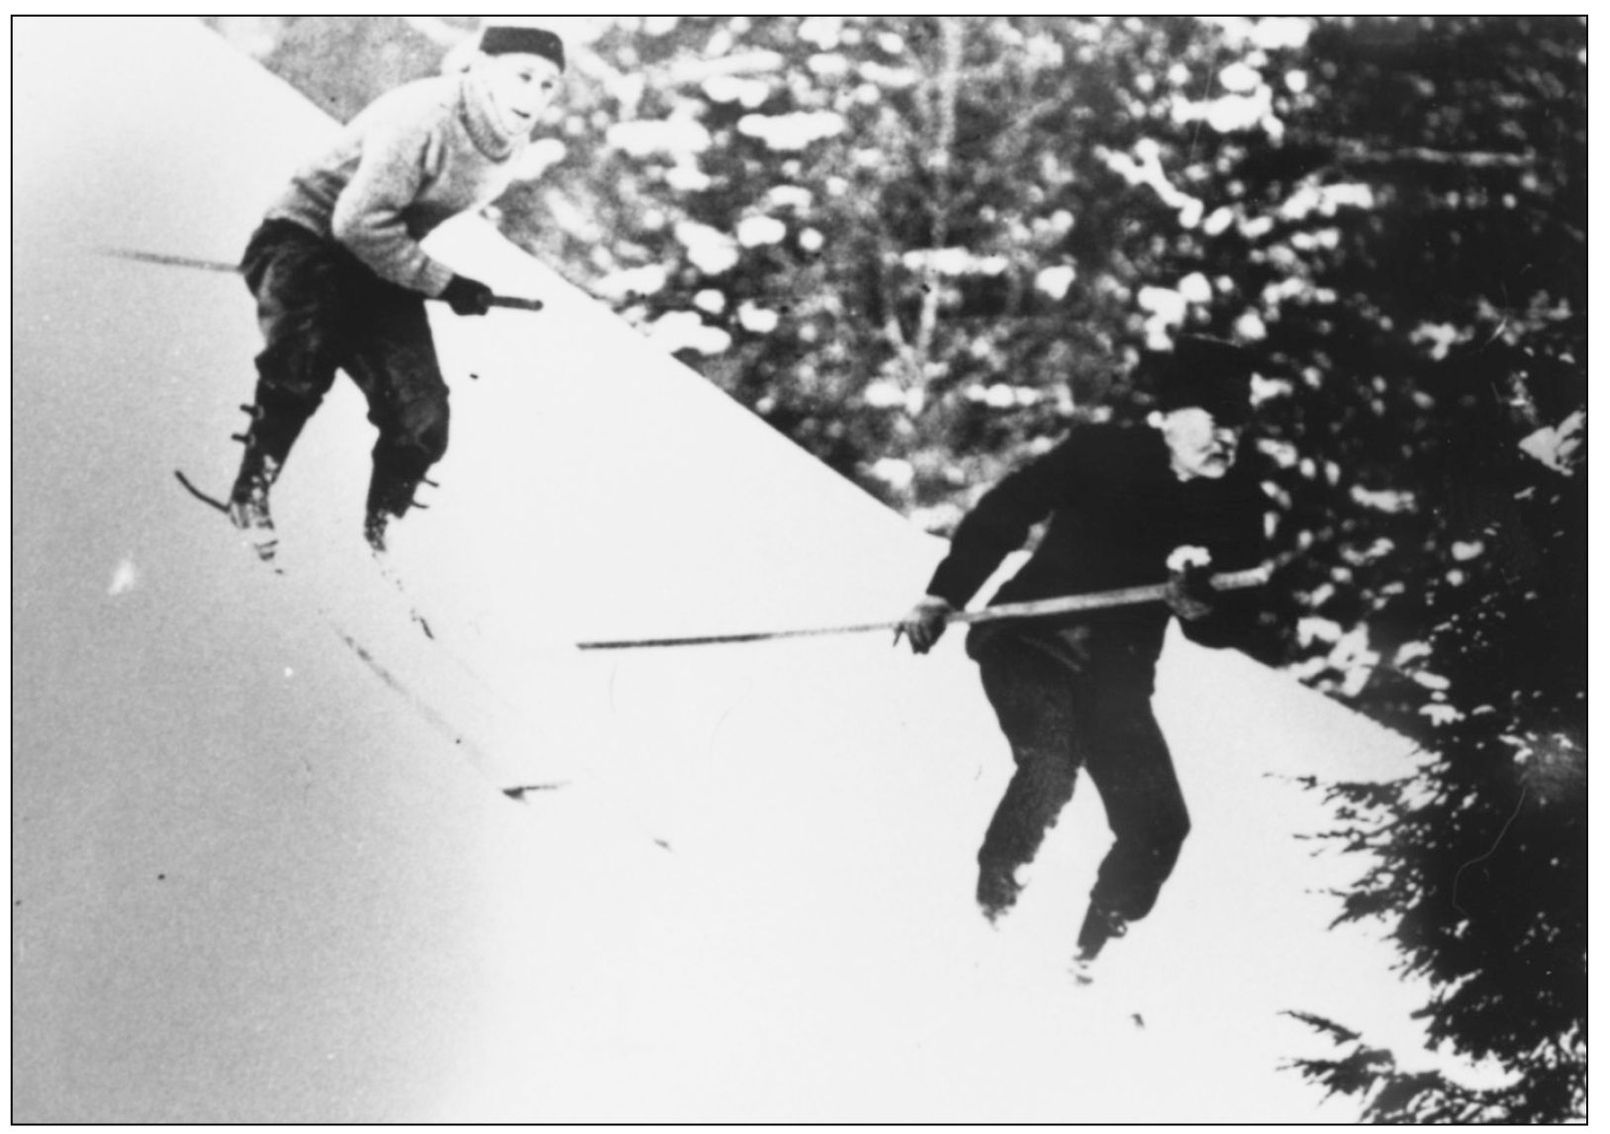 Dr F Lawton leads Fred H Harris at speed on a slide near Brattleboro - photo 3